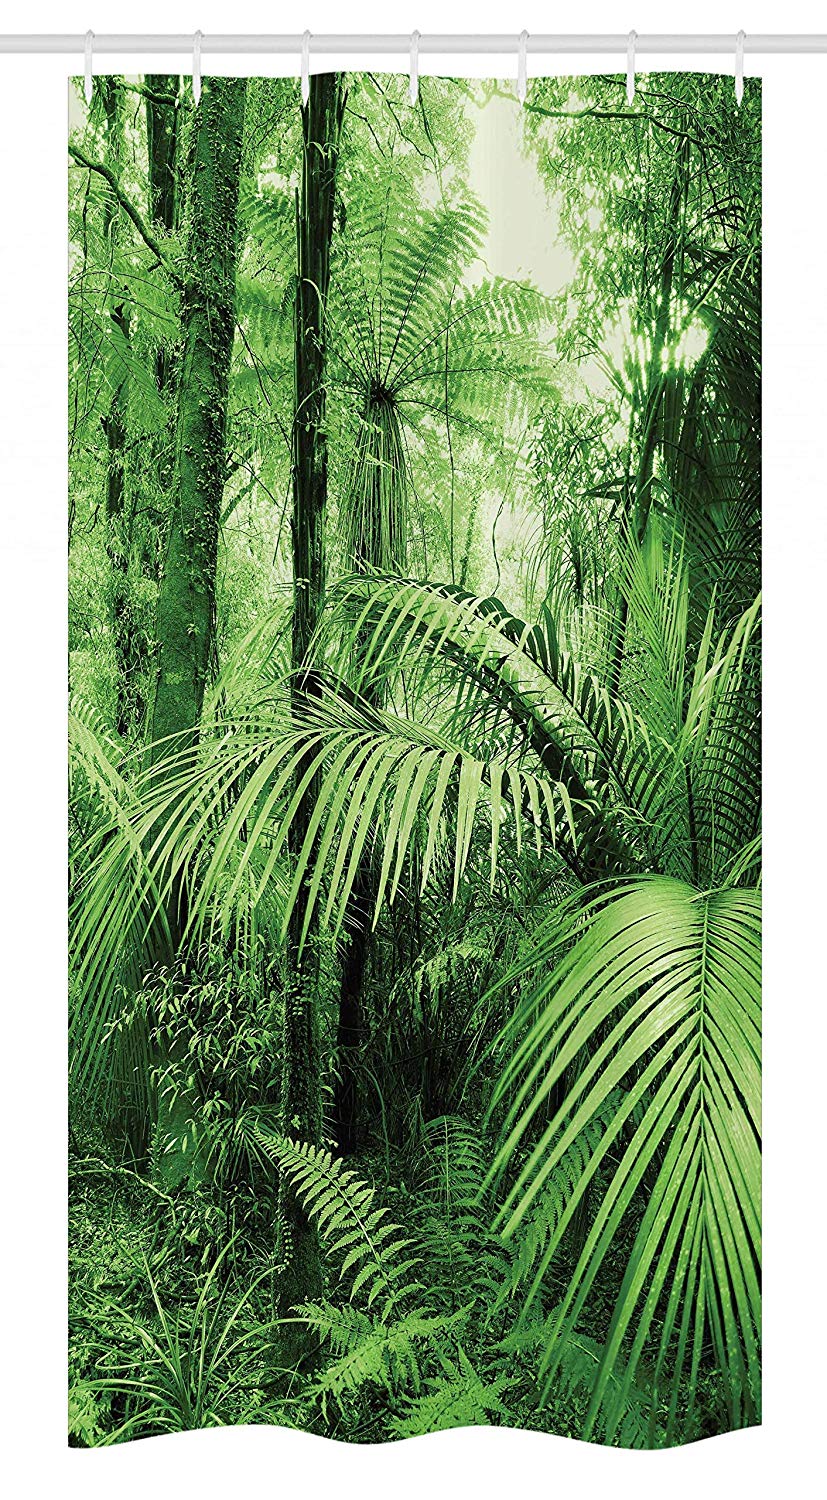 Ambesonne Rainforest Stall Shower Curtain, Palm Trees and Exotic Plants in Tropical Jungle Wild Nature Theme Illustration, Fabric Bathroom Decor Set with Hooks, 36" X 72", Green